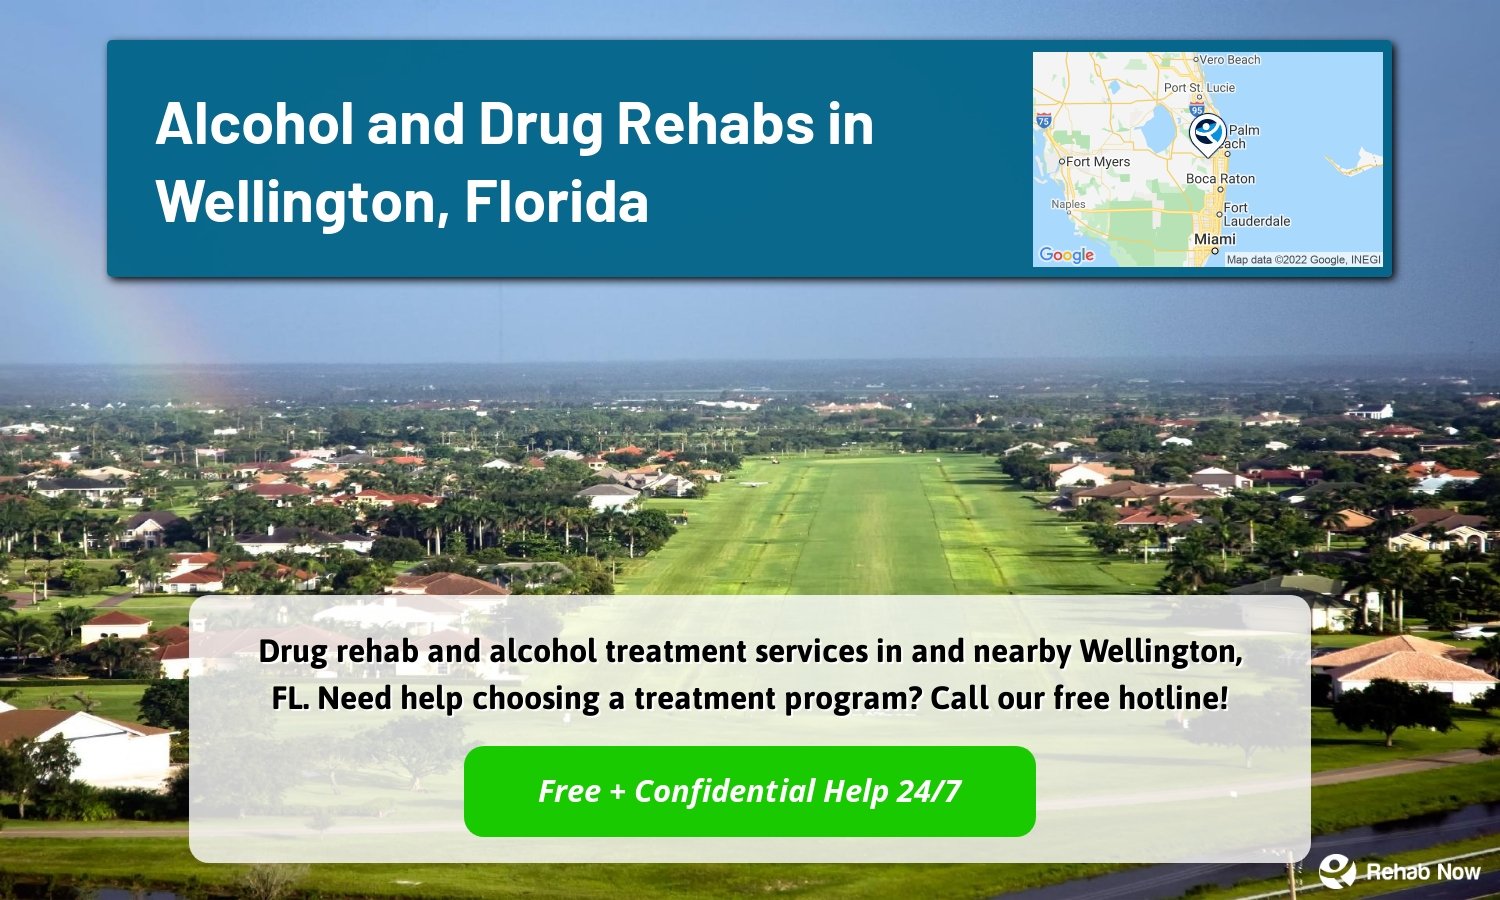 Drug rehab and alcohol treatment services in and nearby Wellington, FL. Need help choosing a treatment program? Call our free hotline!